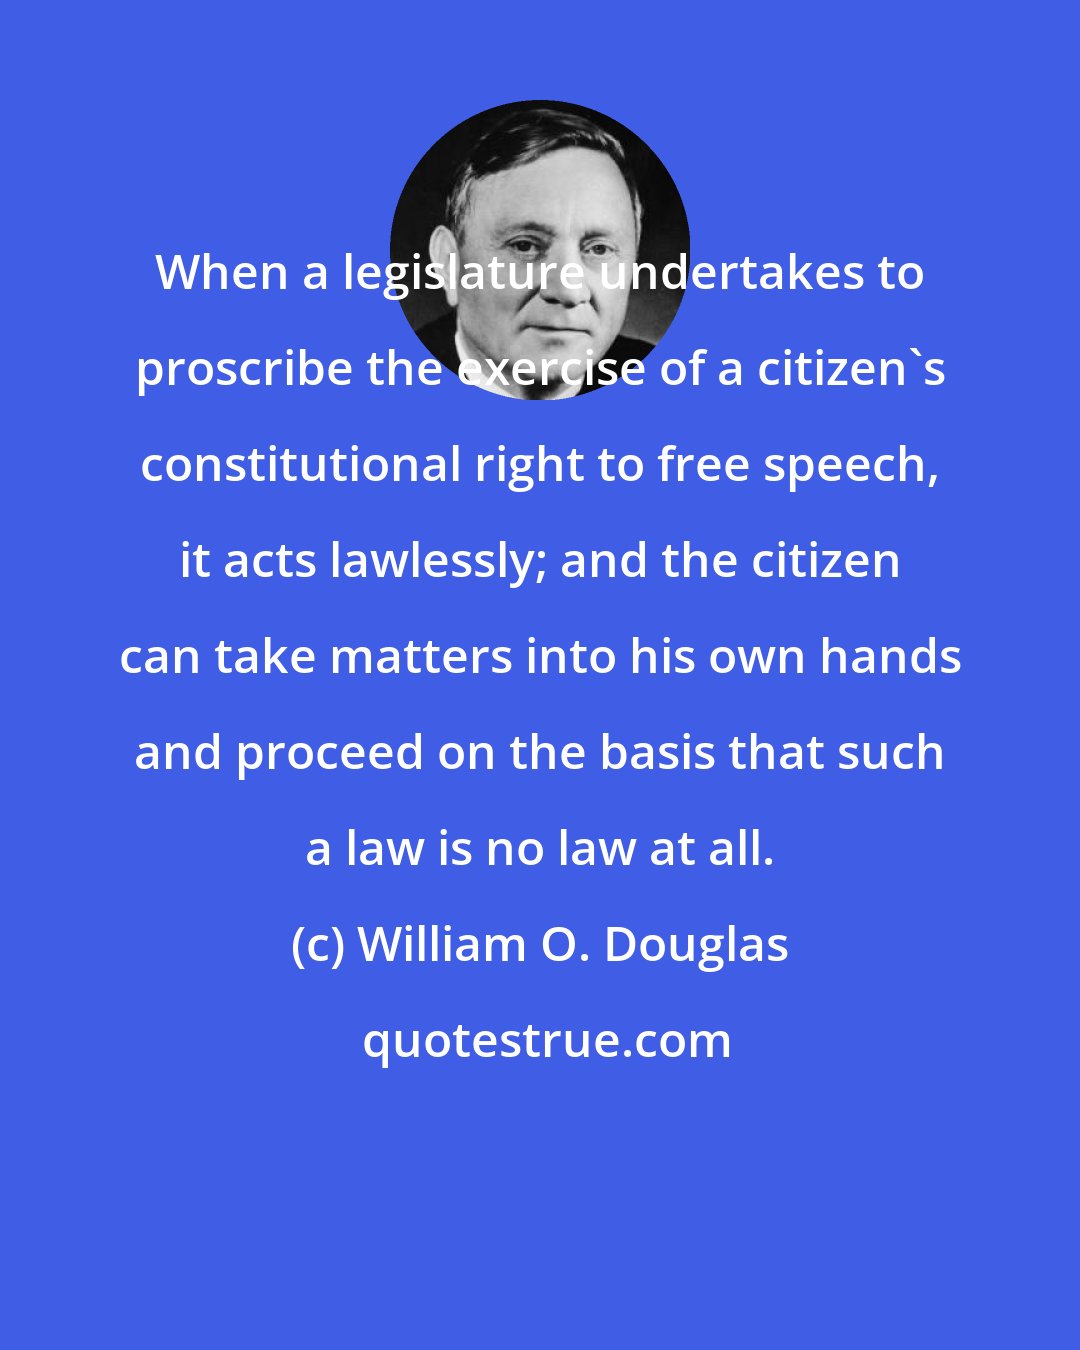 William O. Douglas: When a legislature undertakes to proscribe the exercise of a citizen's constitutional right to free speech, it acts lawlessly; and the citizen can take matters into his own hands and proceed on the basis that such a law is no law at all.